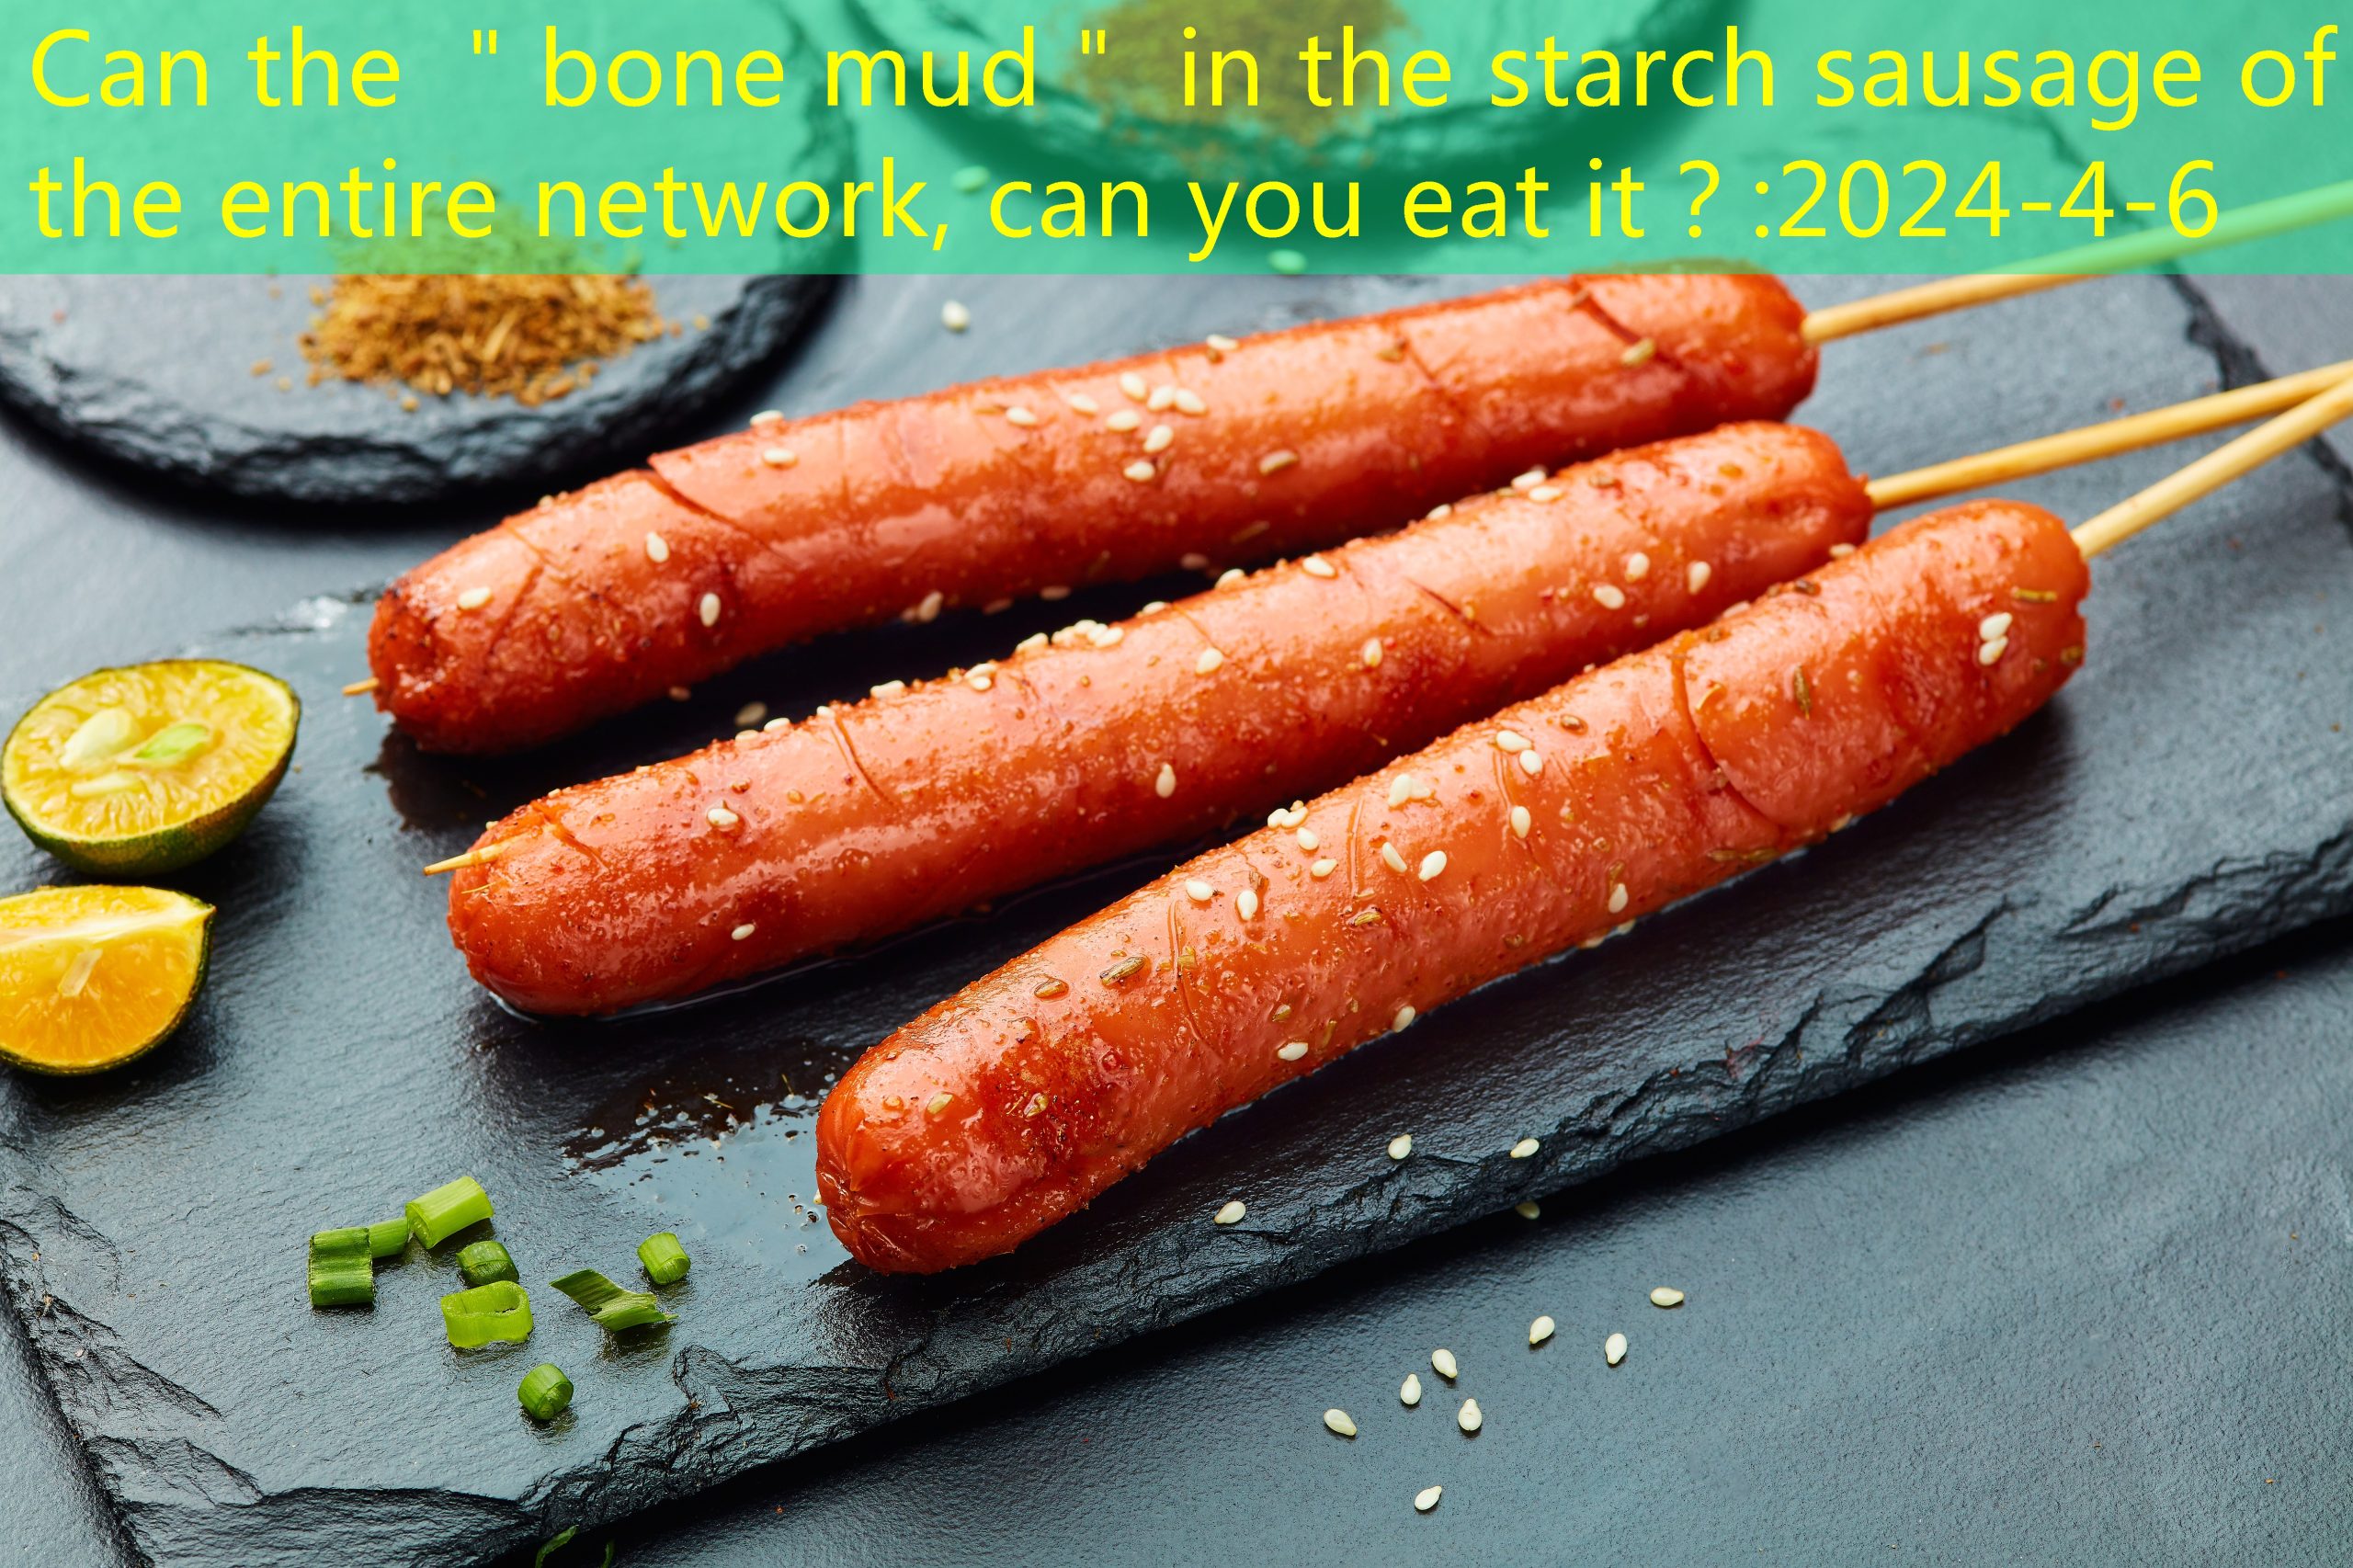 Can the ＂bone mud＂ in the starch sausage of the entire network, can you eat it？